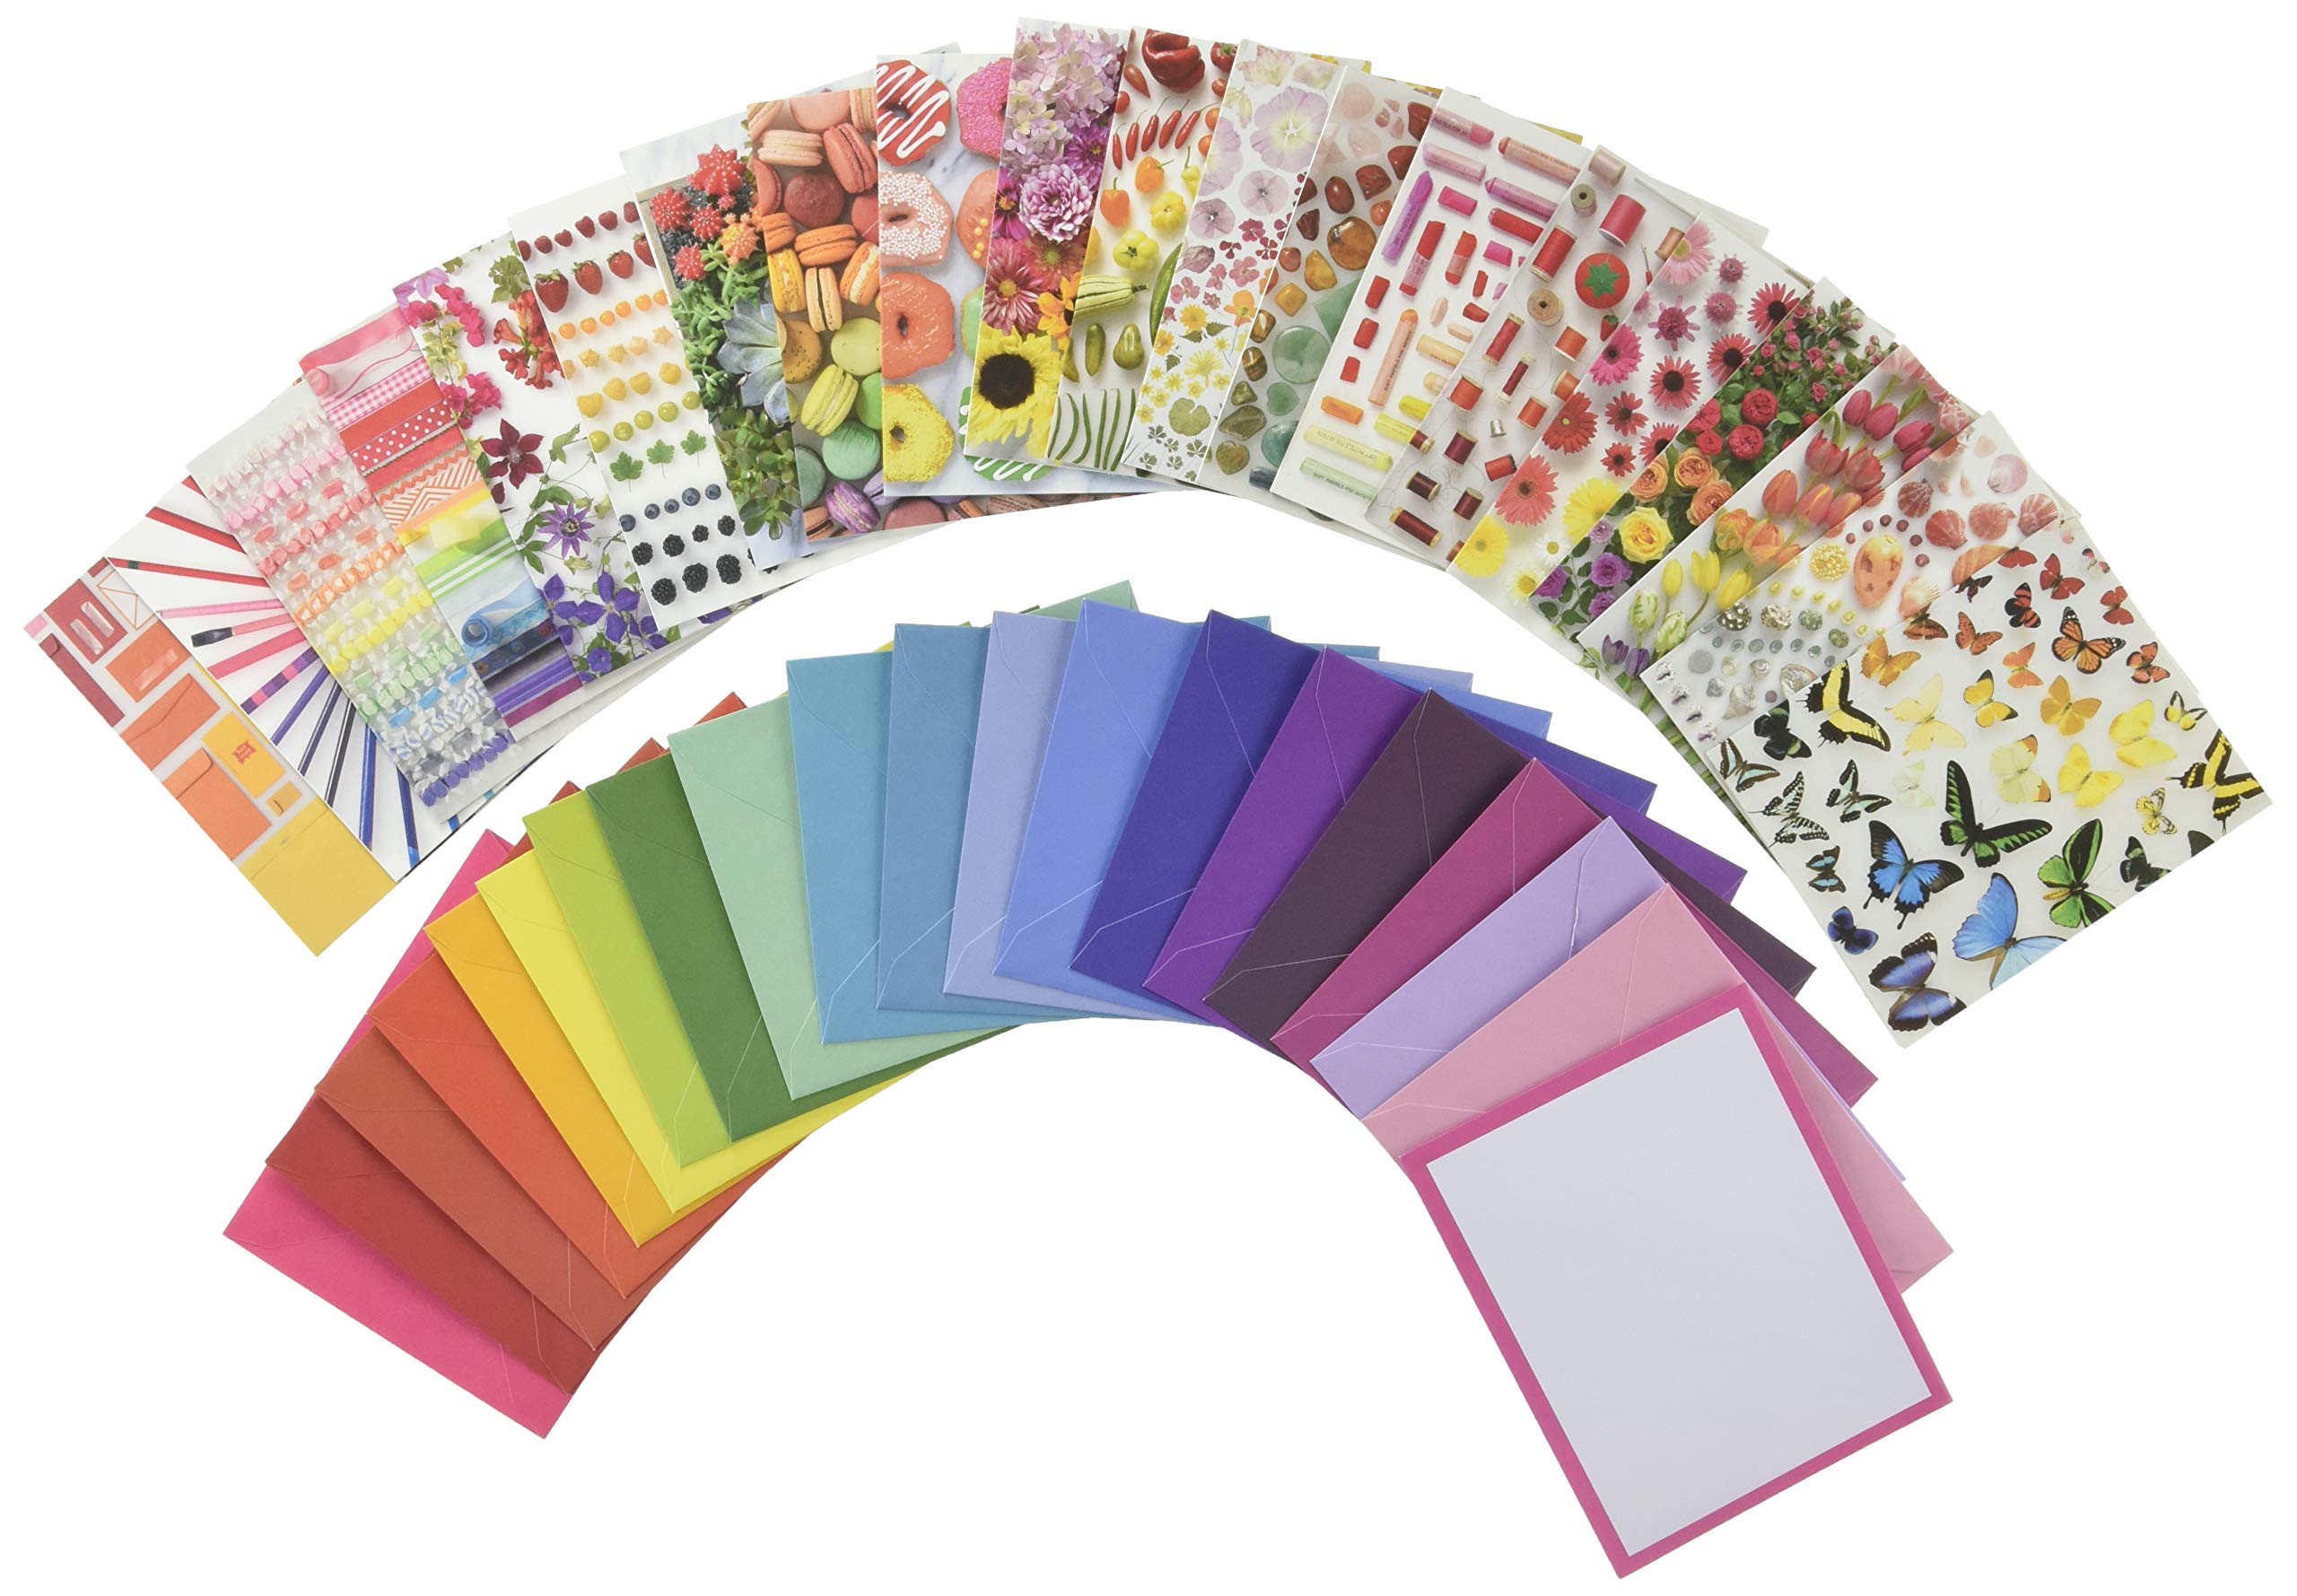 Encyclopedia of Rainbows Notes: 20 Different Notecards & Envelopes (Rainbow Cards, Colorful Blank Stationery)